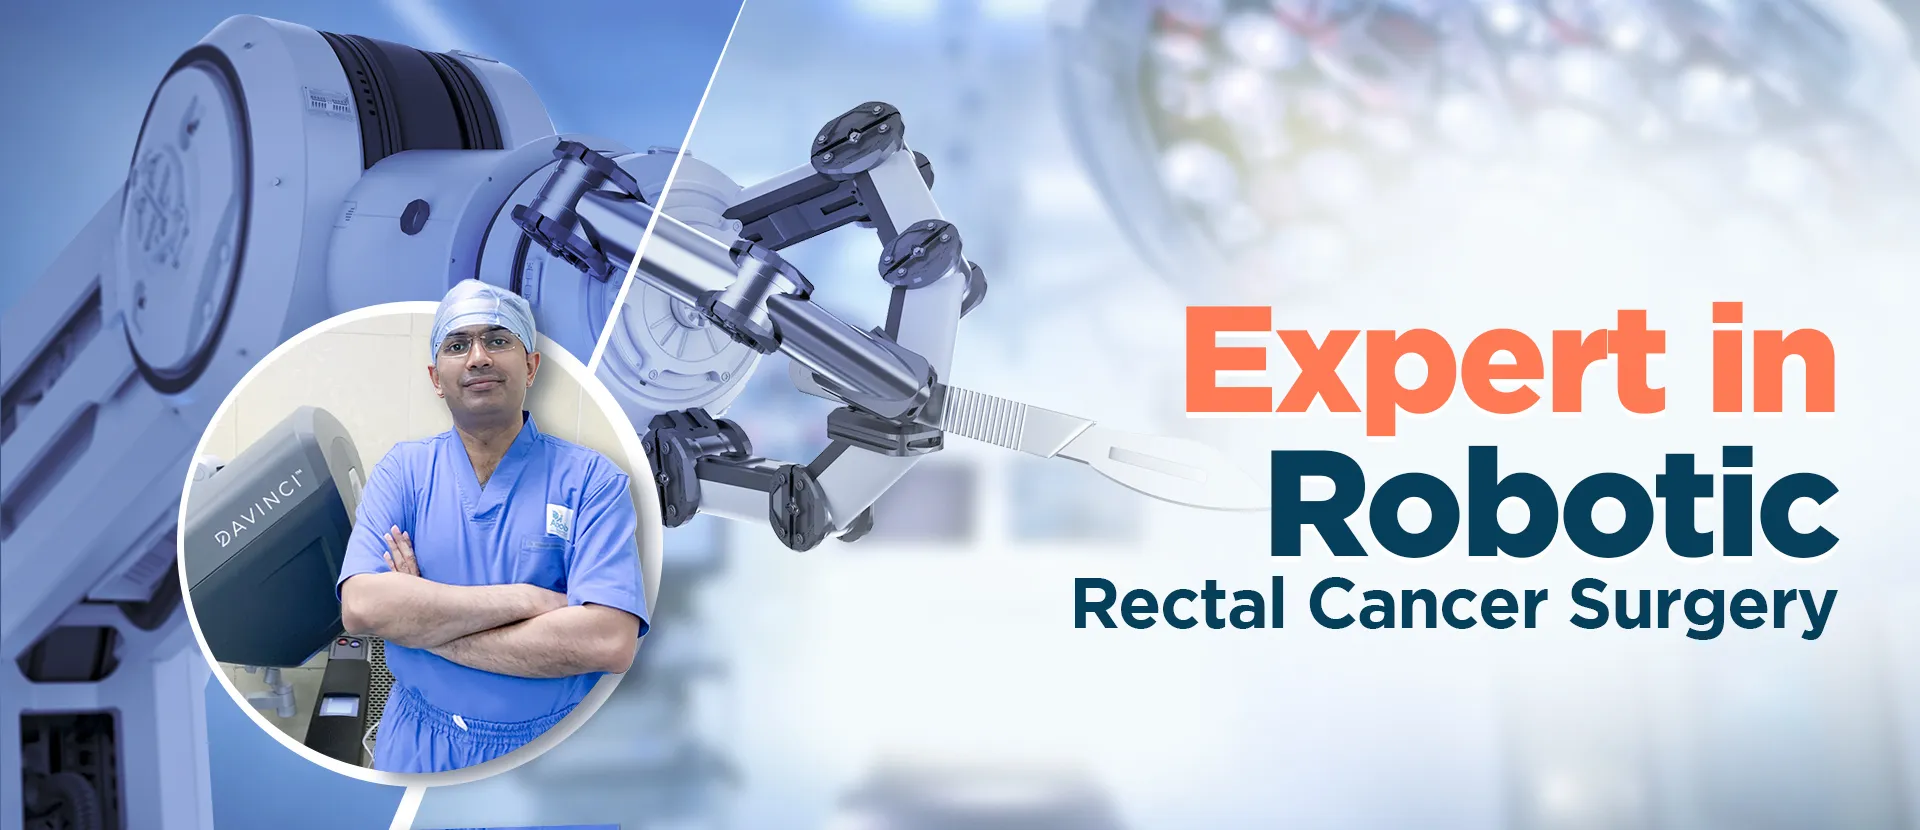 Best robotic rectal cancer surgery in Ahmedabad, India